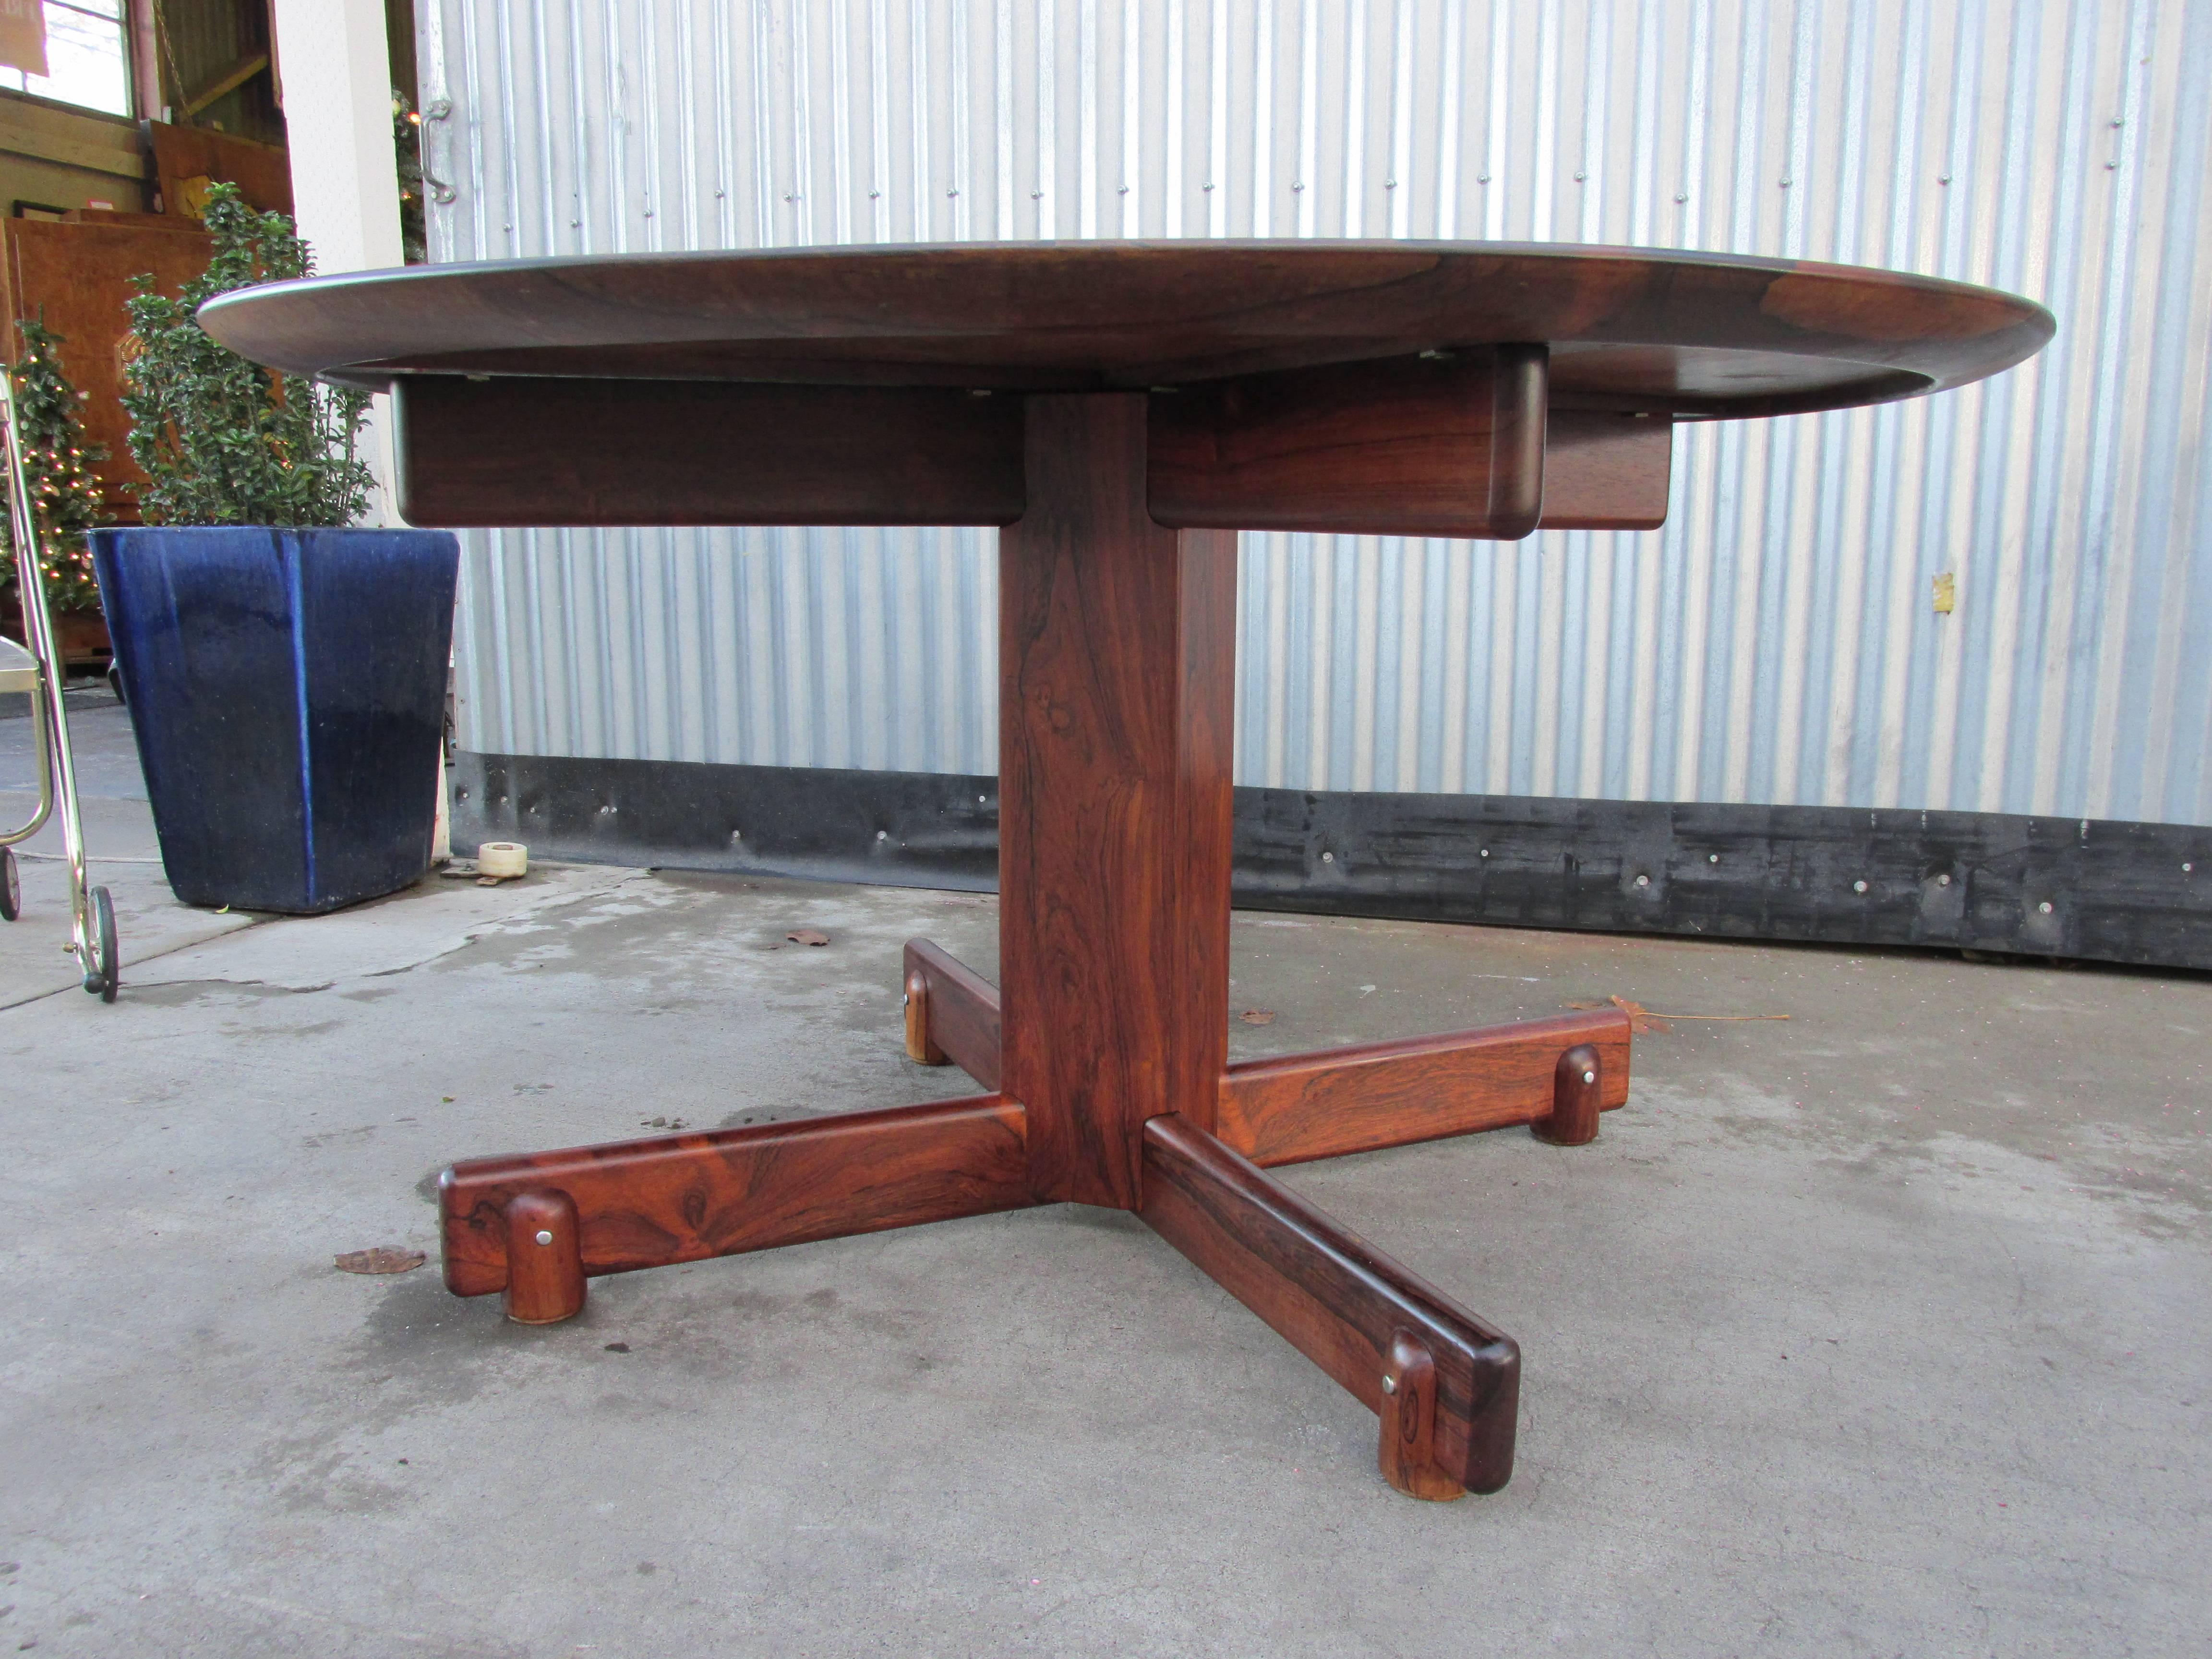 A scarce and fine Brazilian Rosewood circular dining or game table designed by Sergio Rodrigues, (1927-2014), circa 1960s.